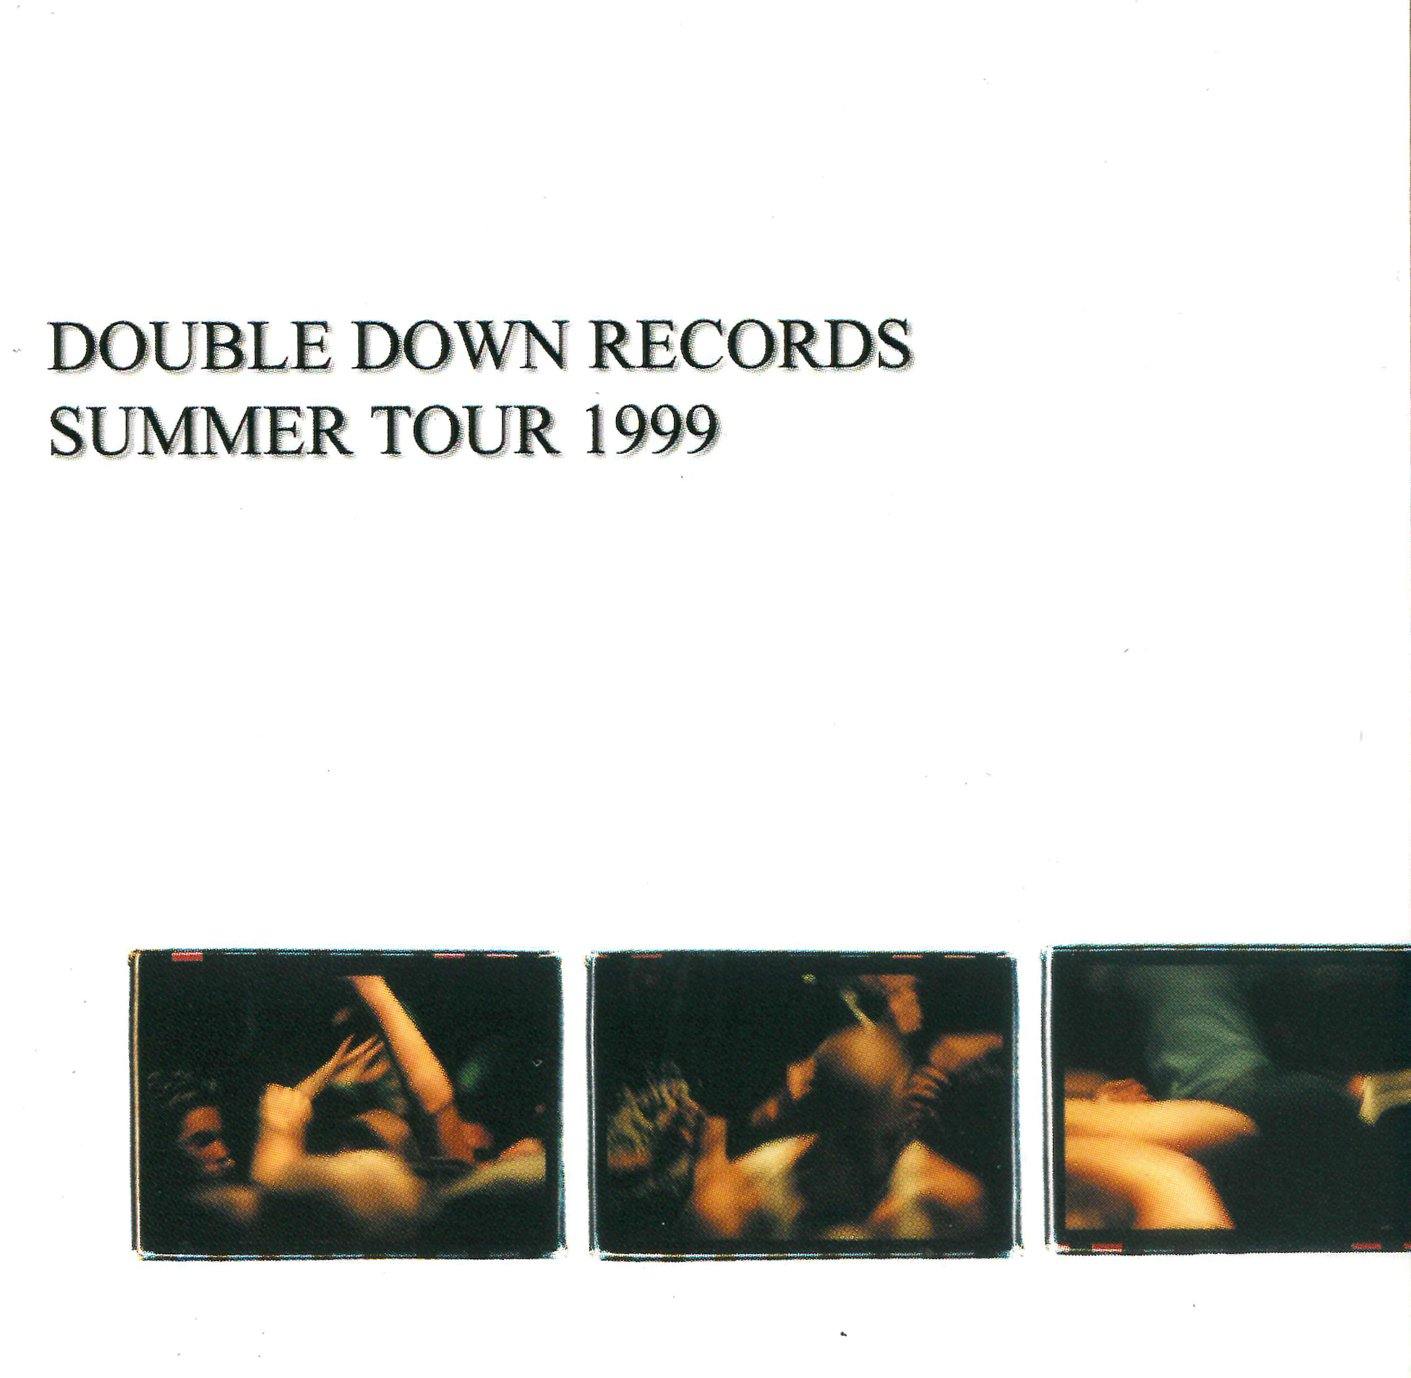 Buy – Double Down Records "Summer Tour 1999" CD – Band & Music Merch – Cold Cuts Merch